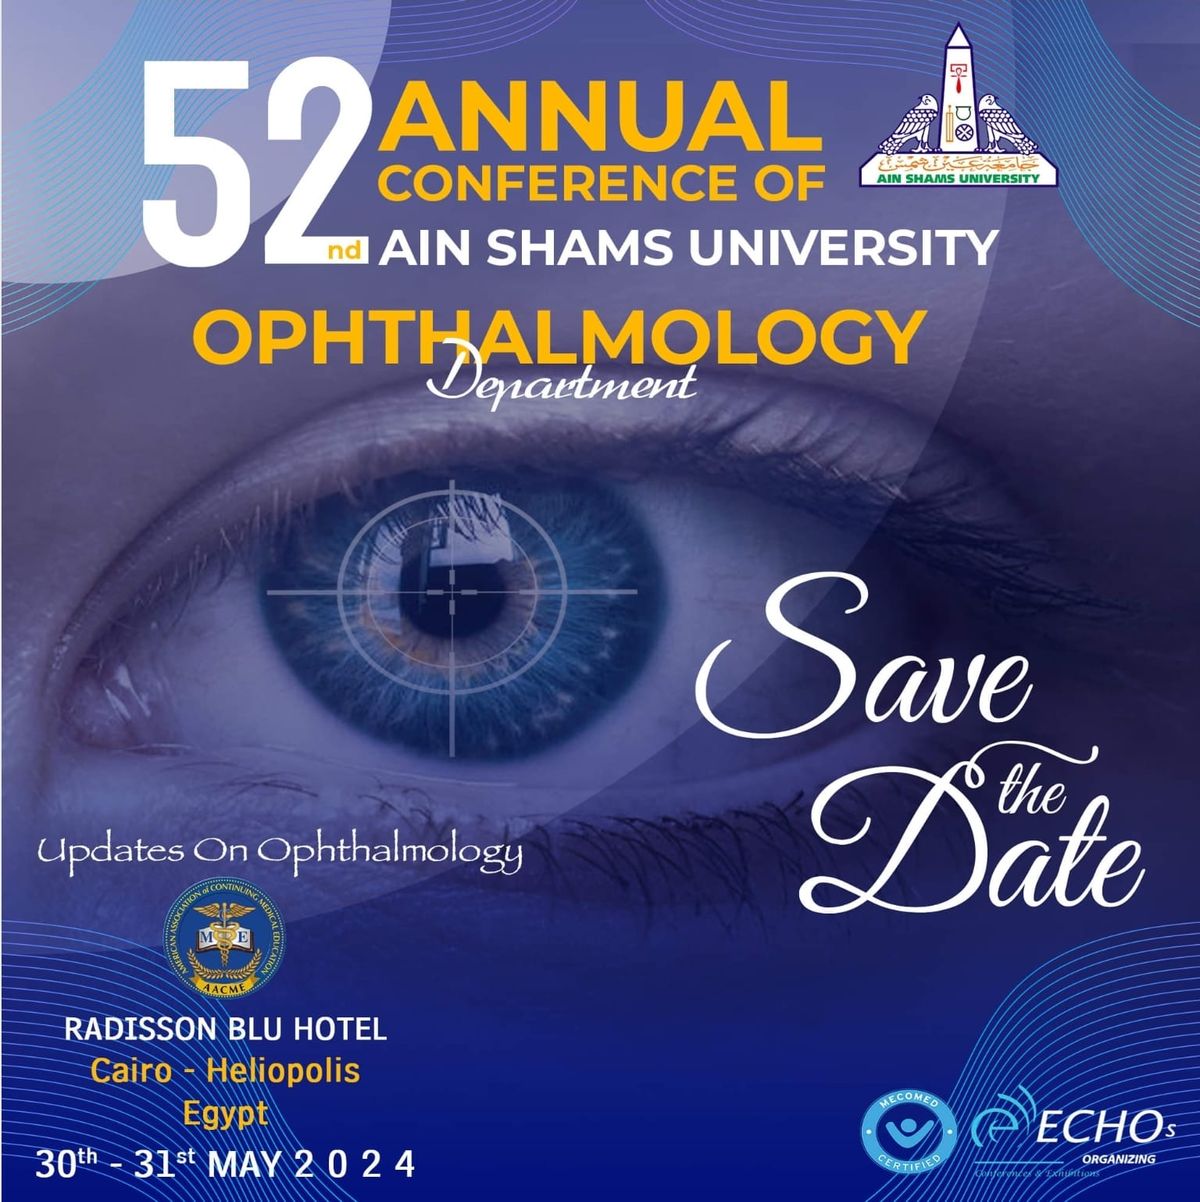 52nd Annual Conference of Ain Shams University Ophthalmology Department! 